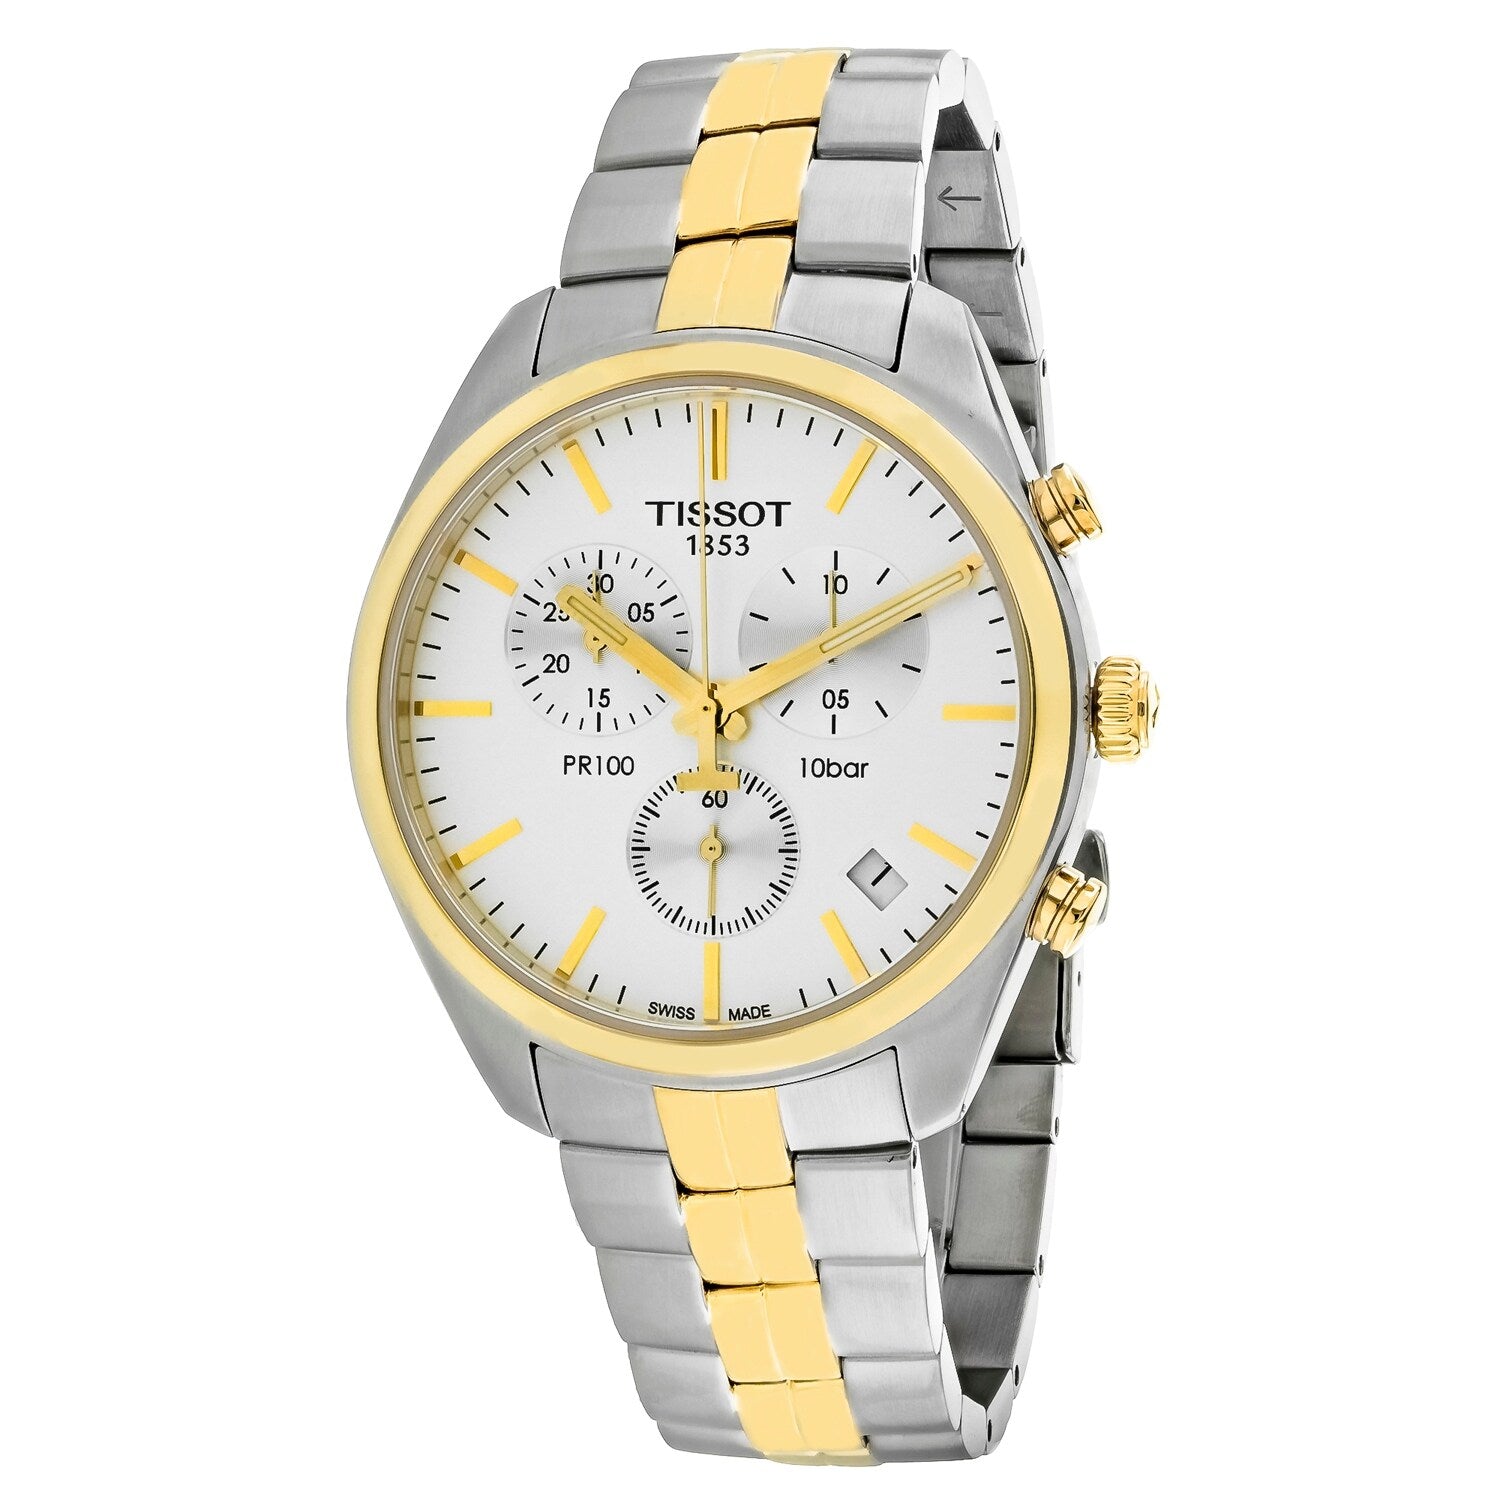 Tissot Swiss Made T-Classic PR100 Chronograph 2 Tone Gold Stainless Steel Men's Watch T1014172203100 - Diligence1International